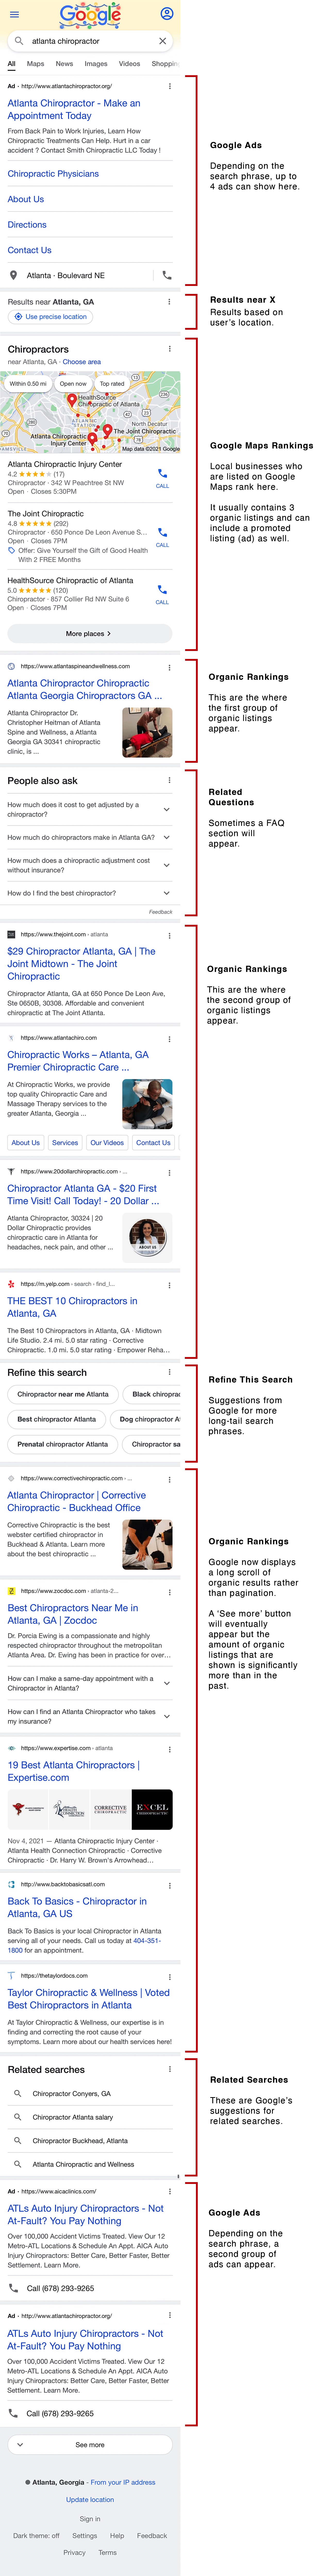 Mobile search results example on Google